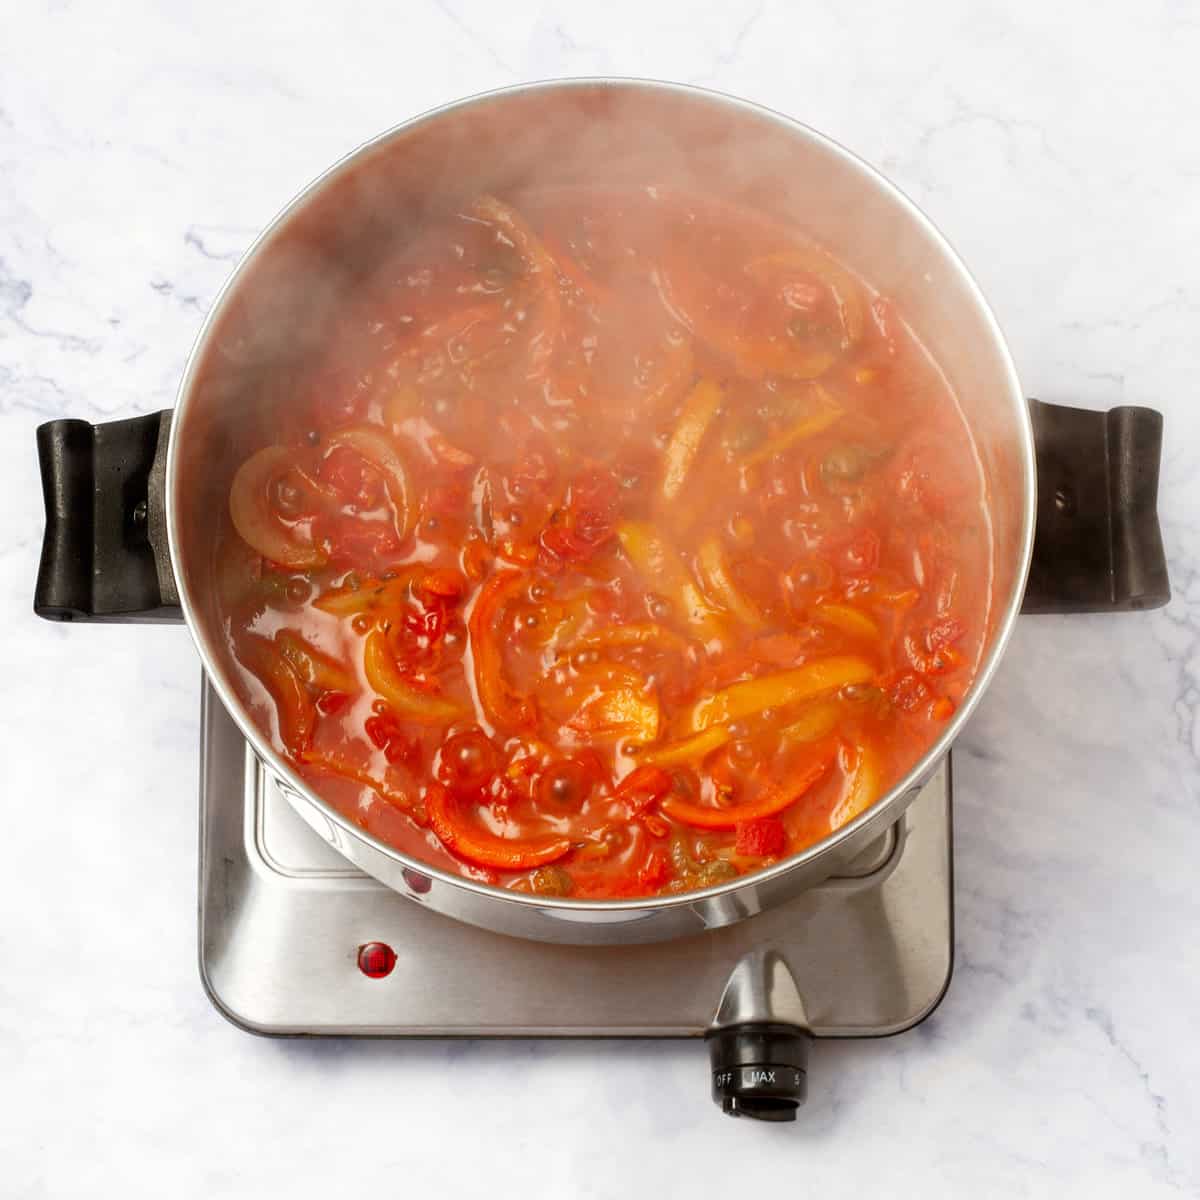 Sliced onions, red and yellow bell peppers, and diced tomatoes cooking in a saucepan